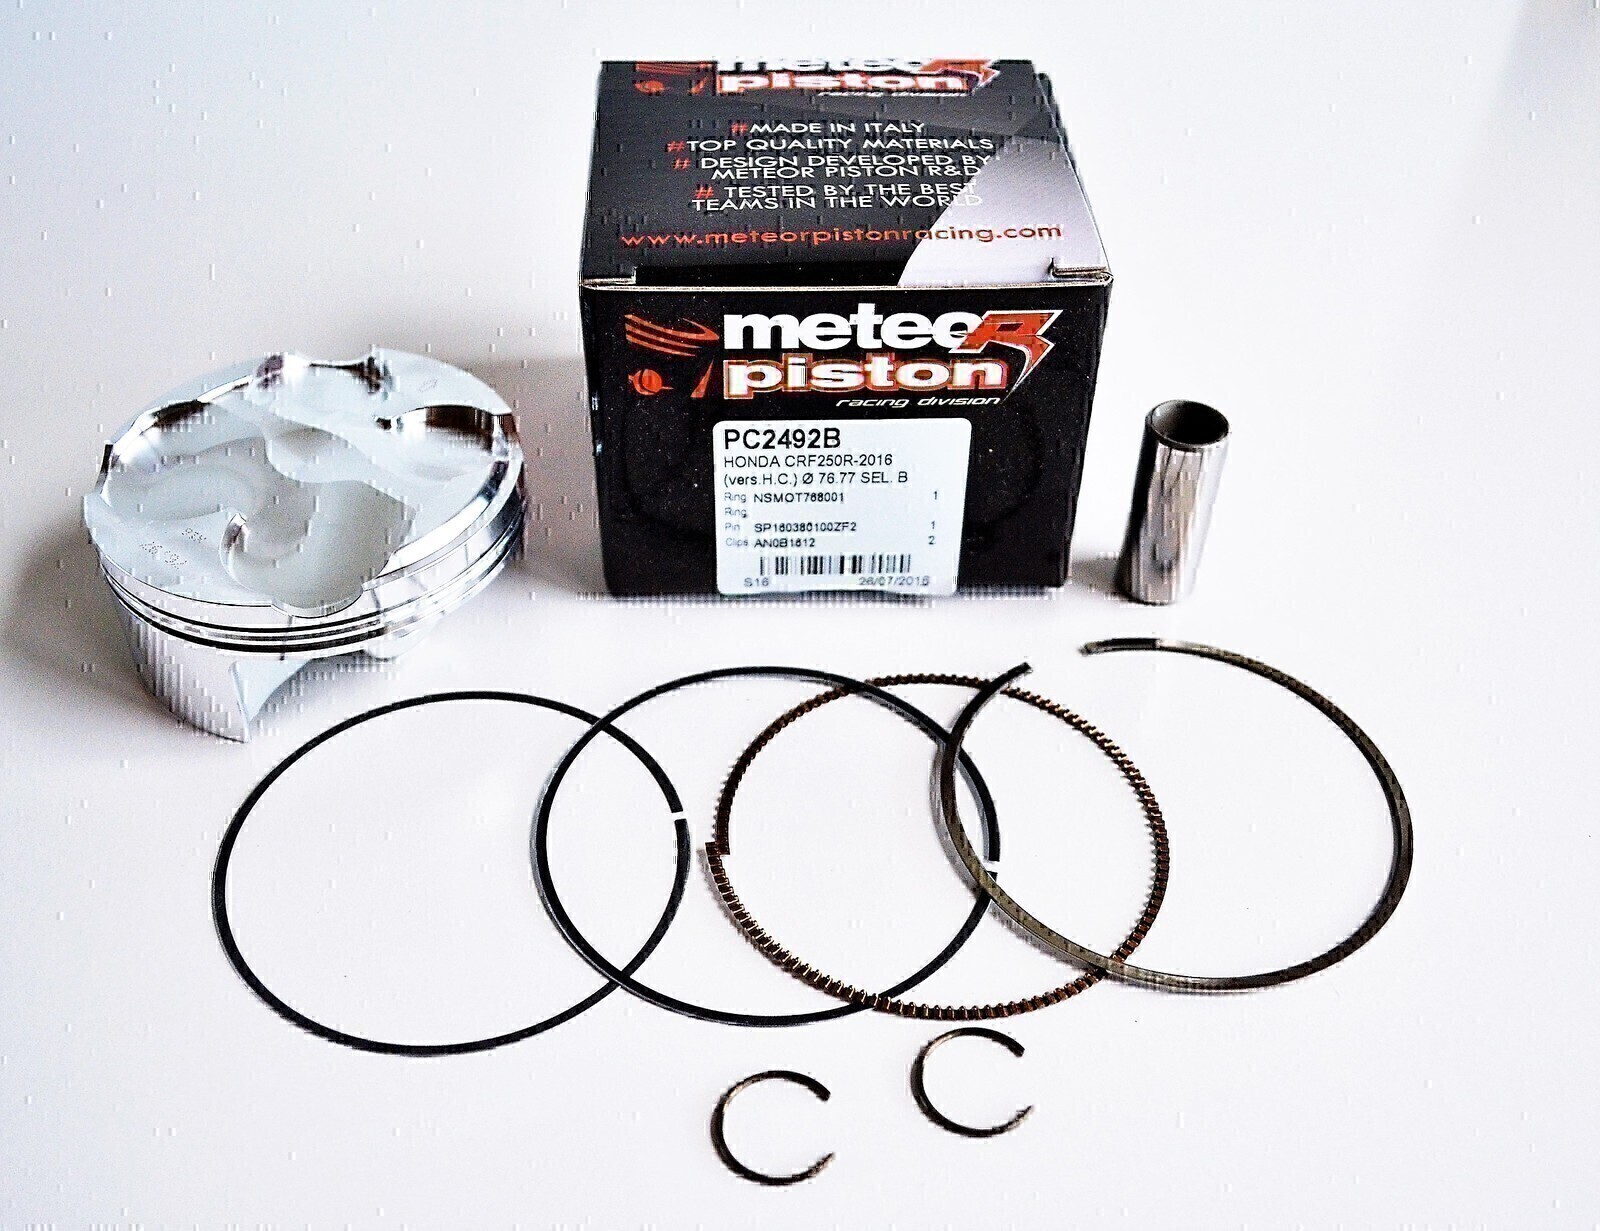 METEOR PISTON KIT FOR HONDA CRF250R CRF 250R 2016 HIGH COMP SIZE B